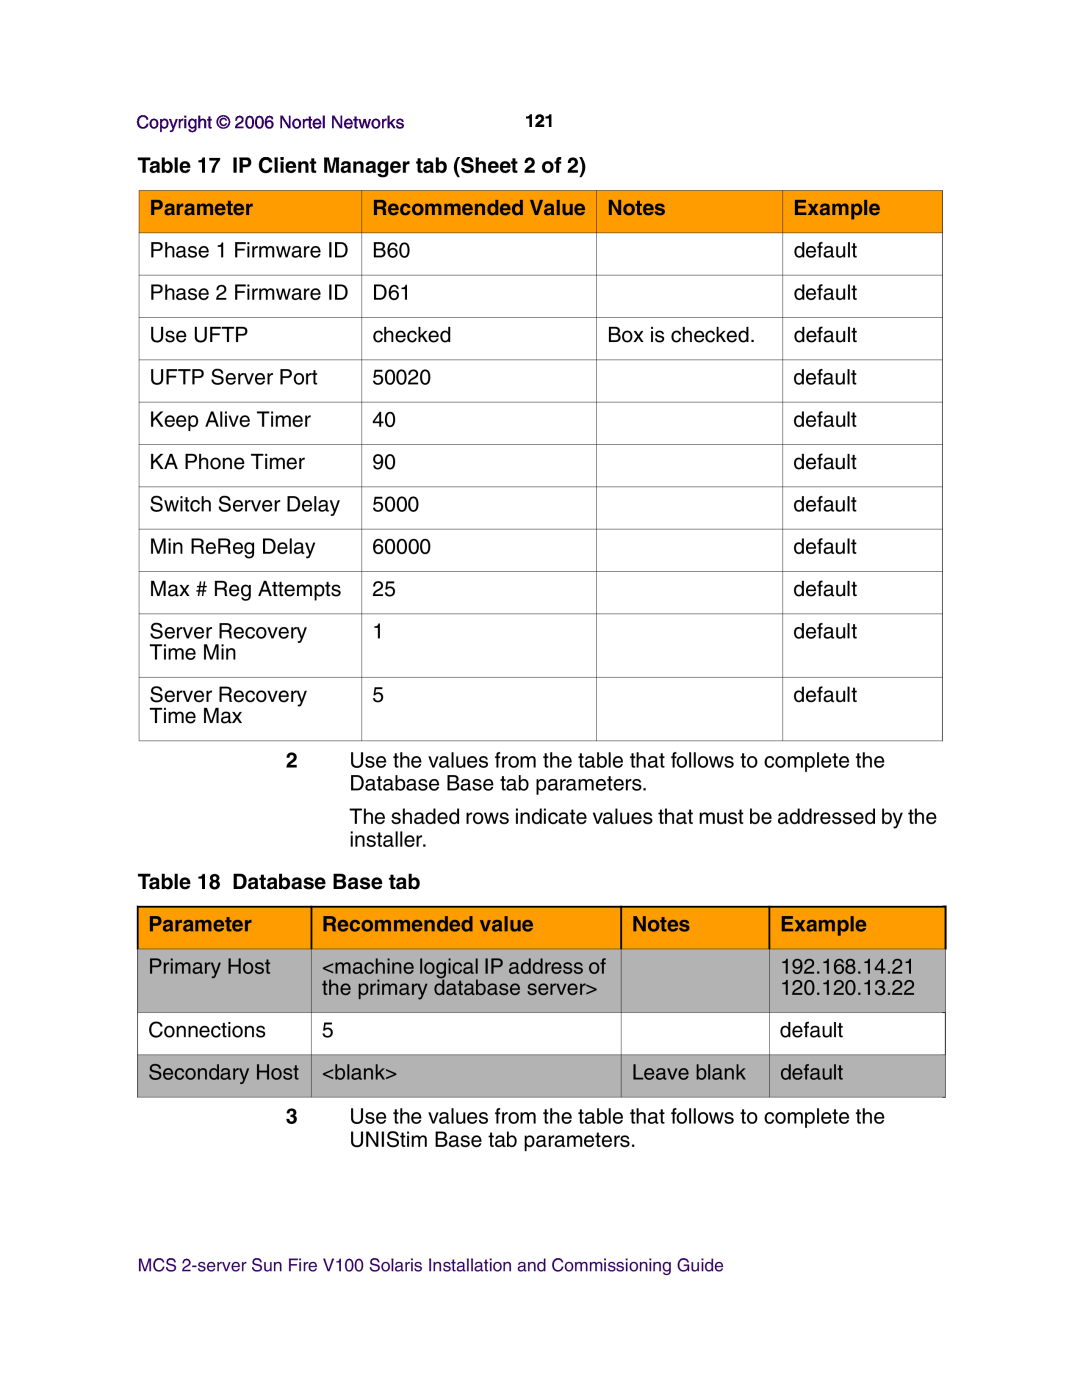 Nortel Networks V100 manual IP Client Manager tab Sheet 2 of, Database Base tab, Parameter, Recommended Value, Example 